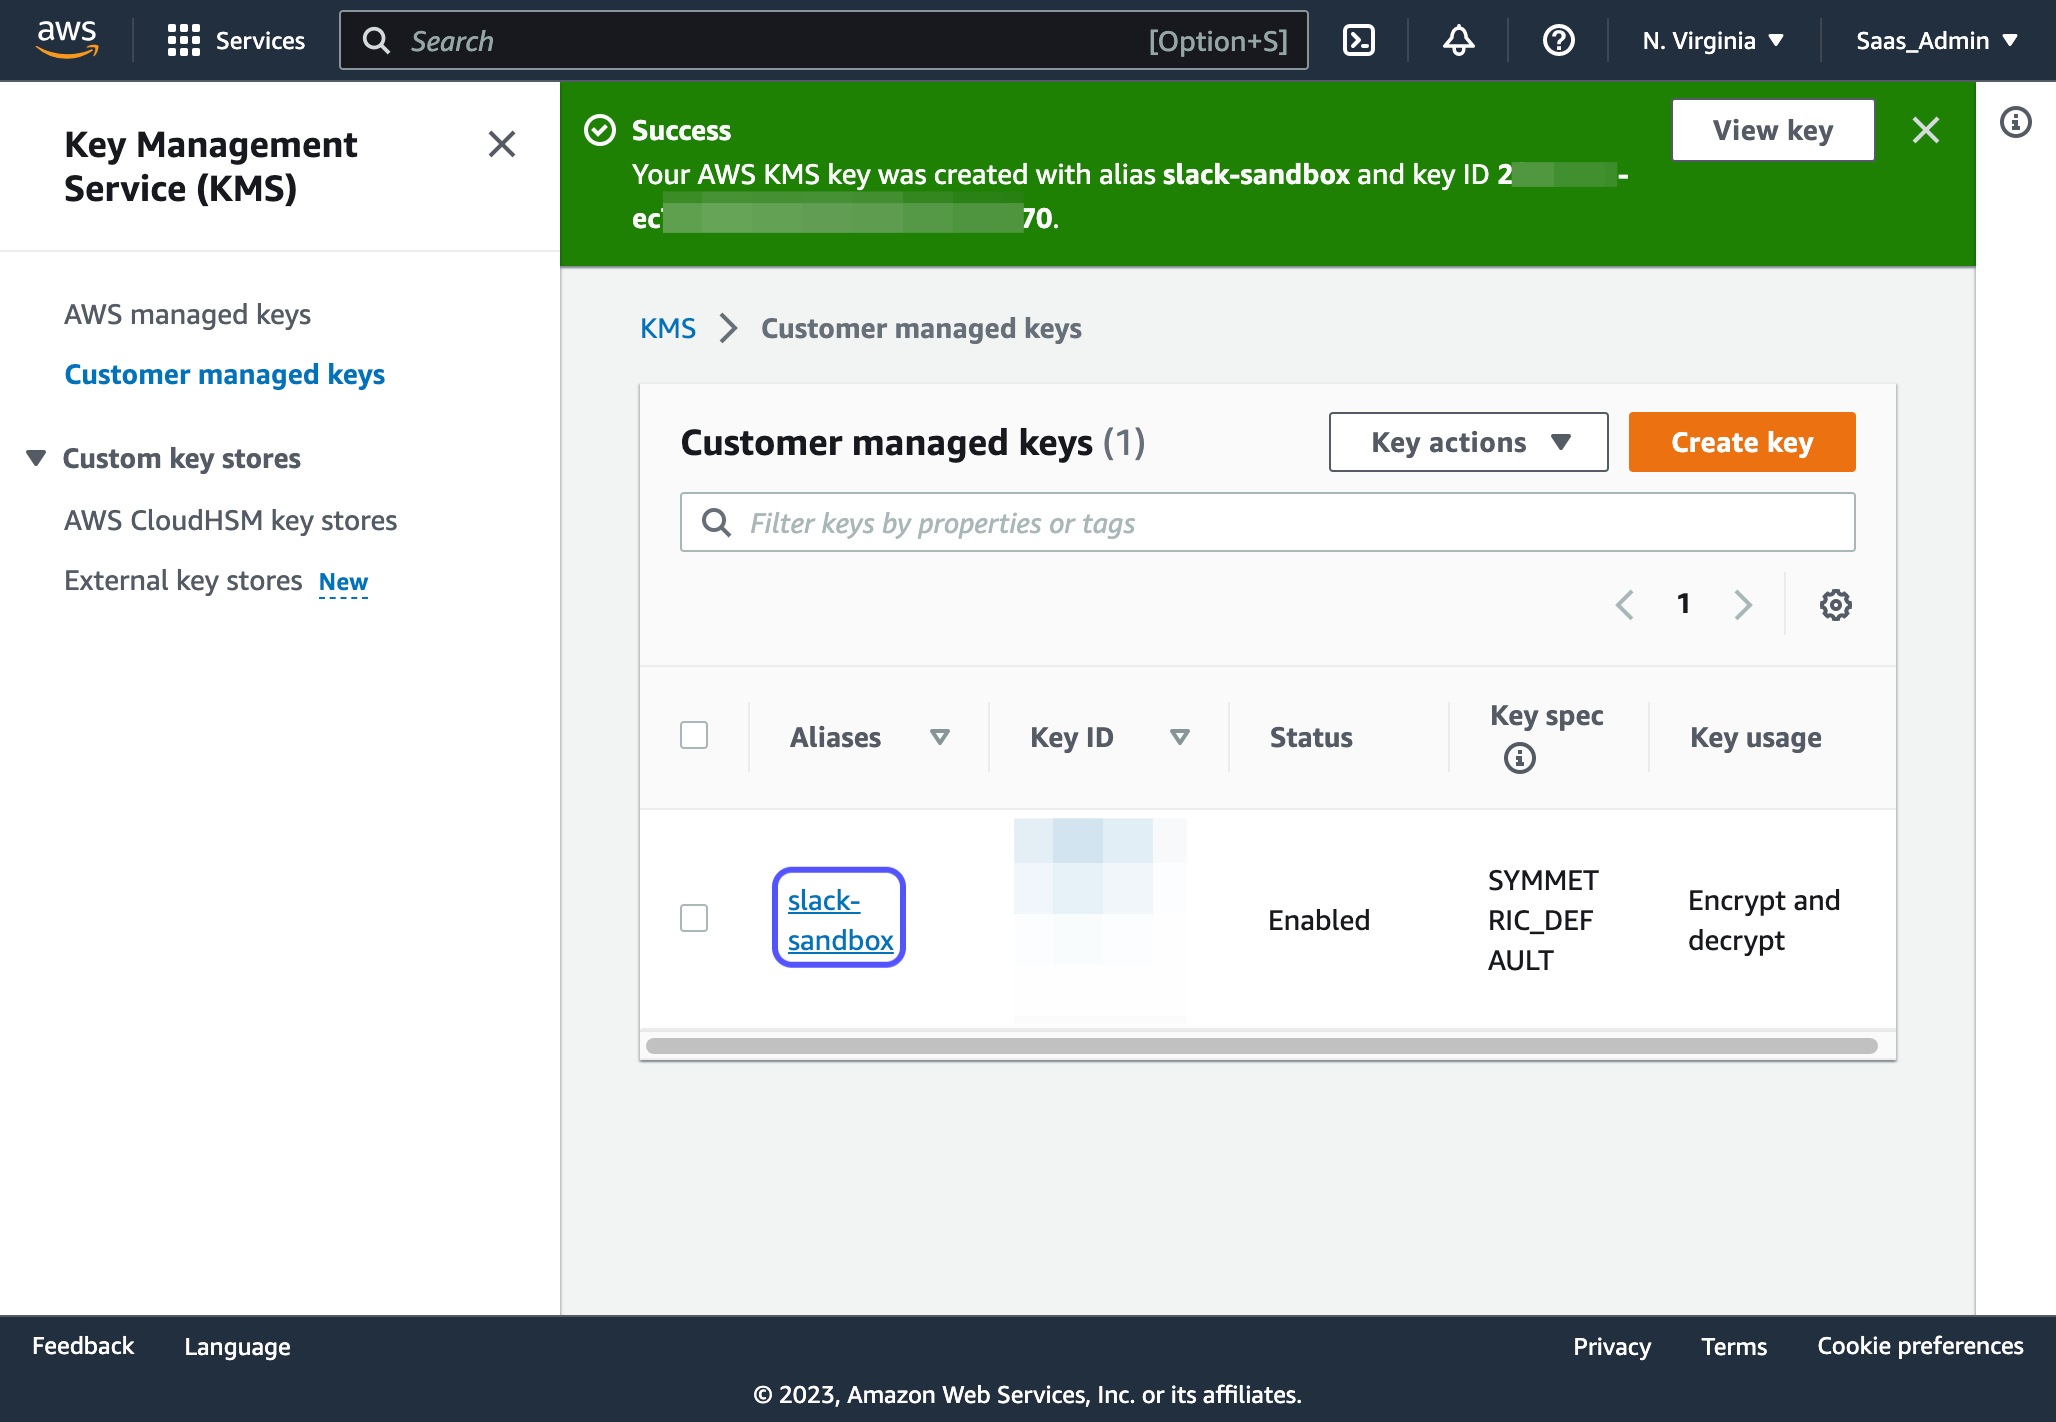 Own Your Data: Configuring BYOK for Enterprise SAAS